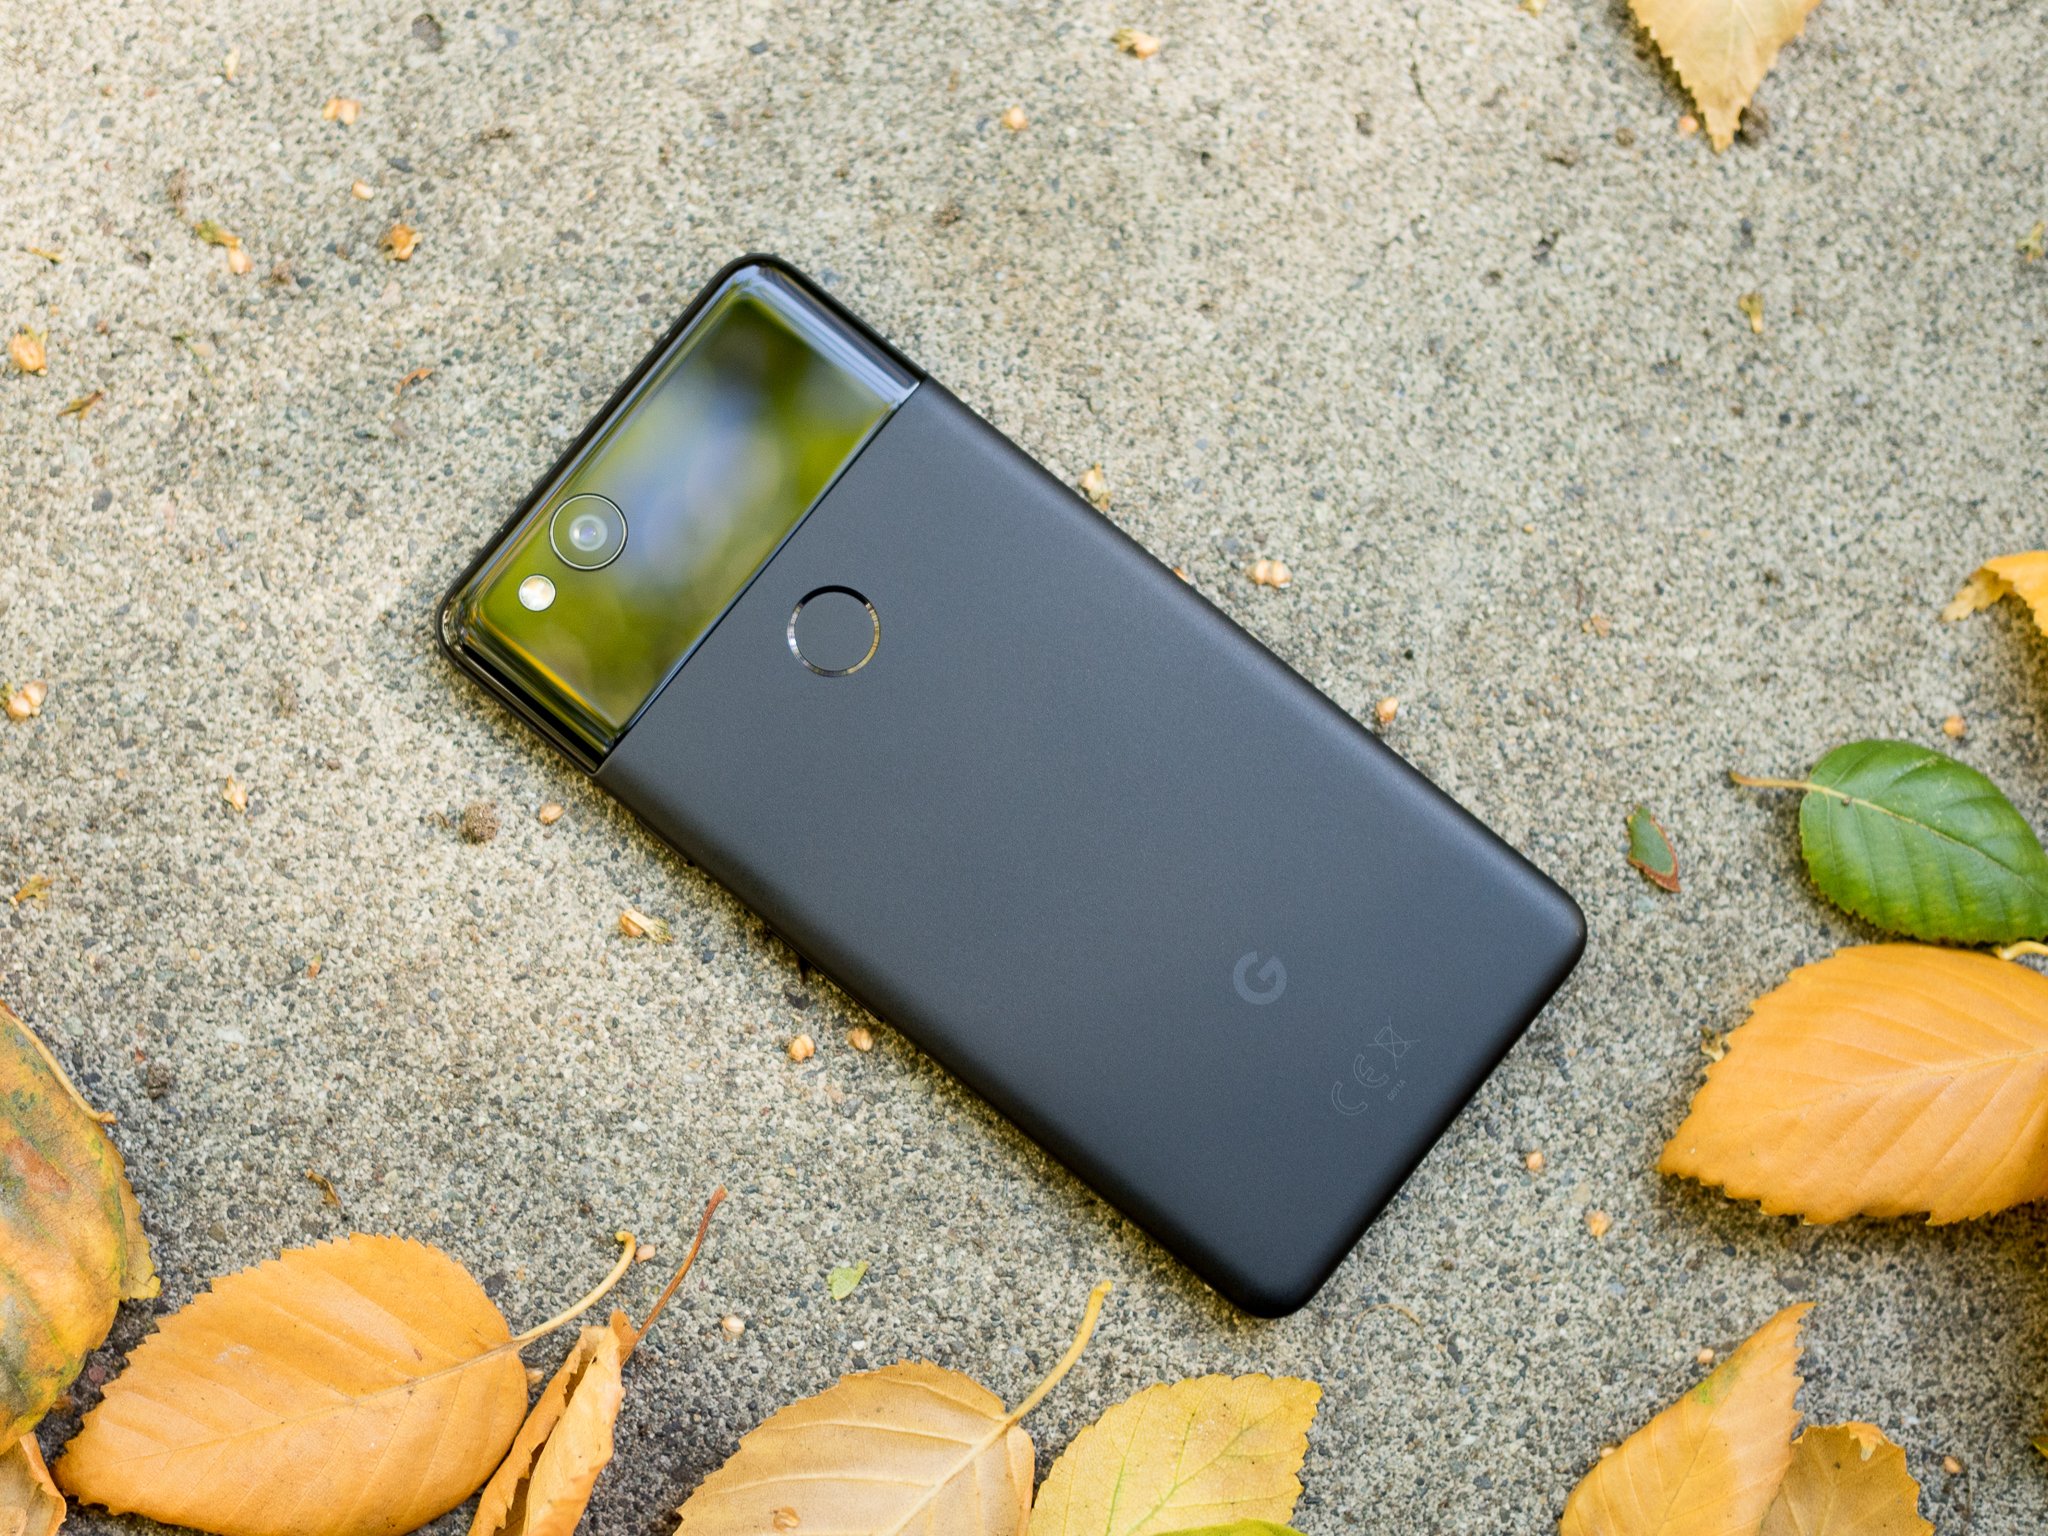 Google reportedly shipped 3.9 million Pixel phones in 2017